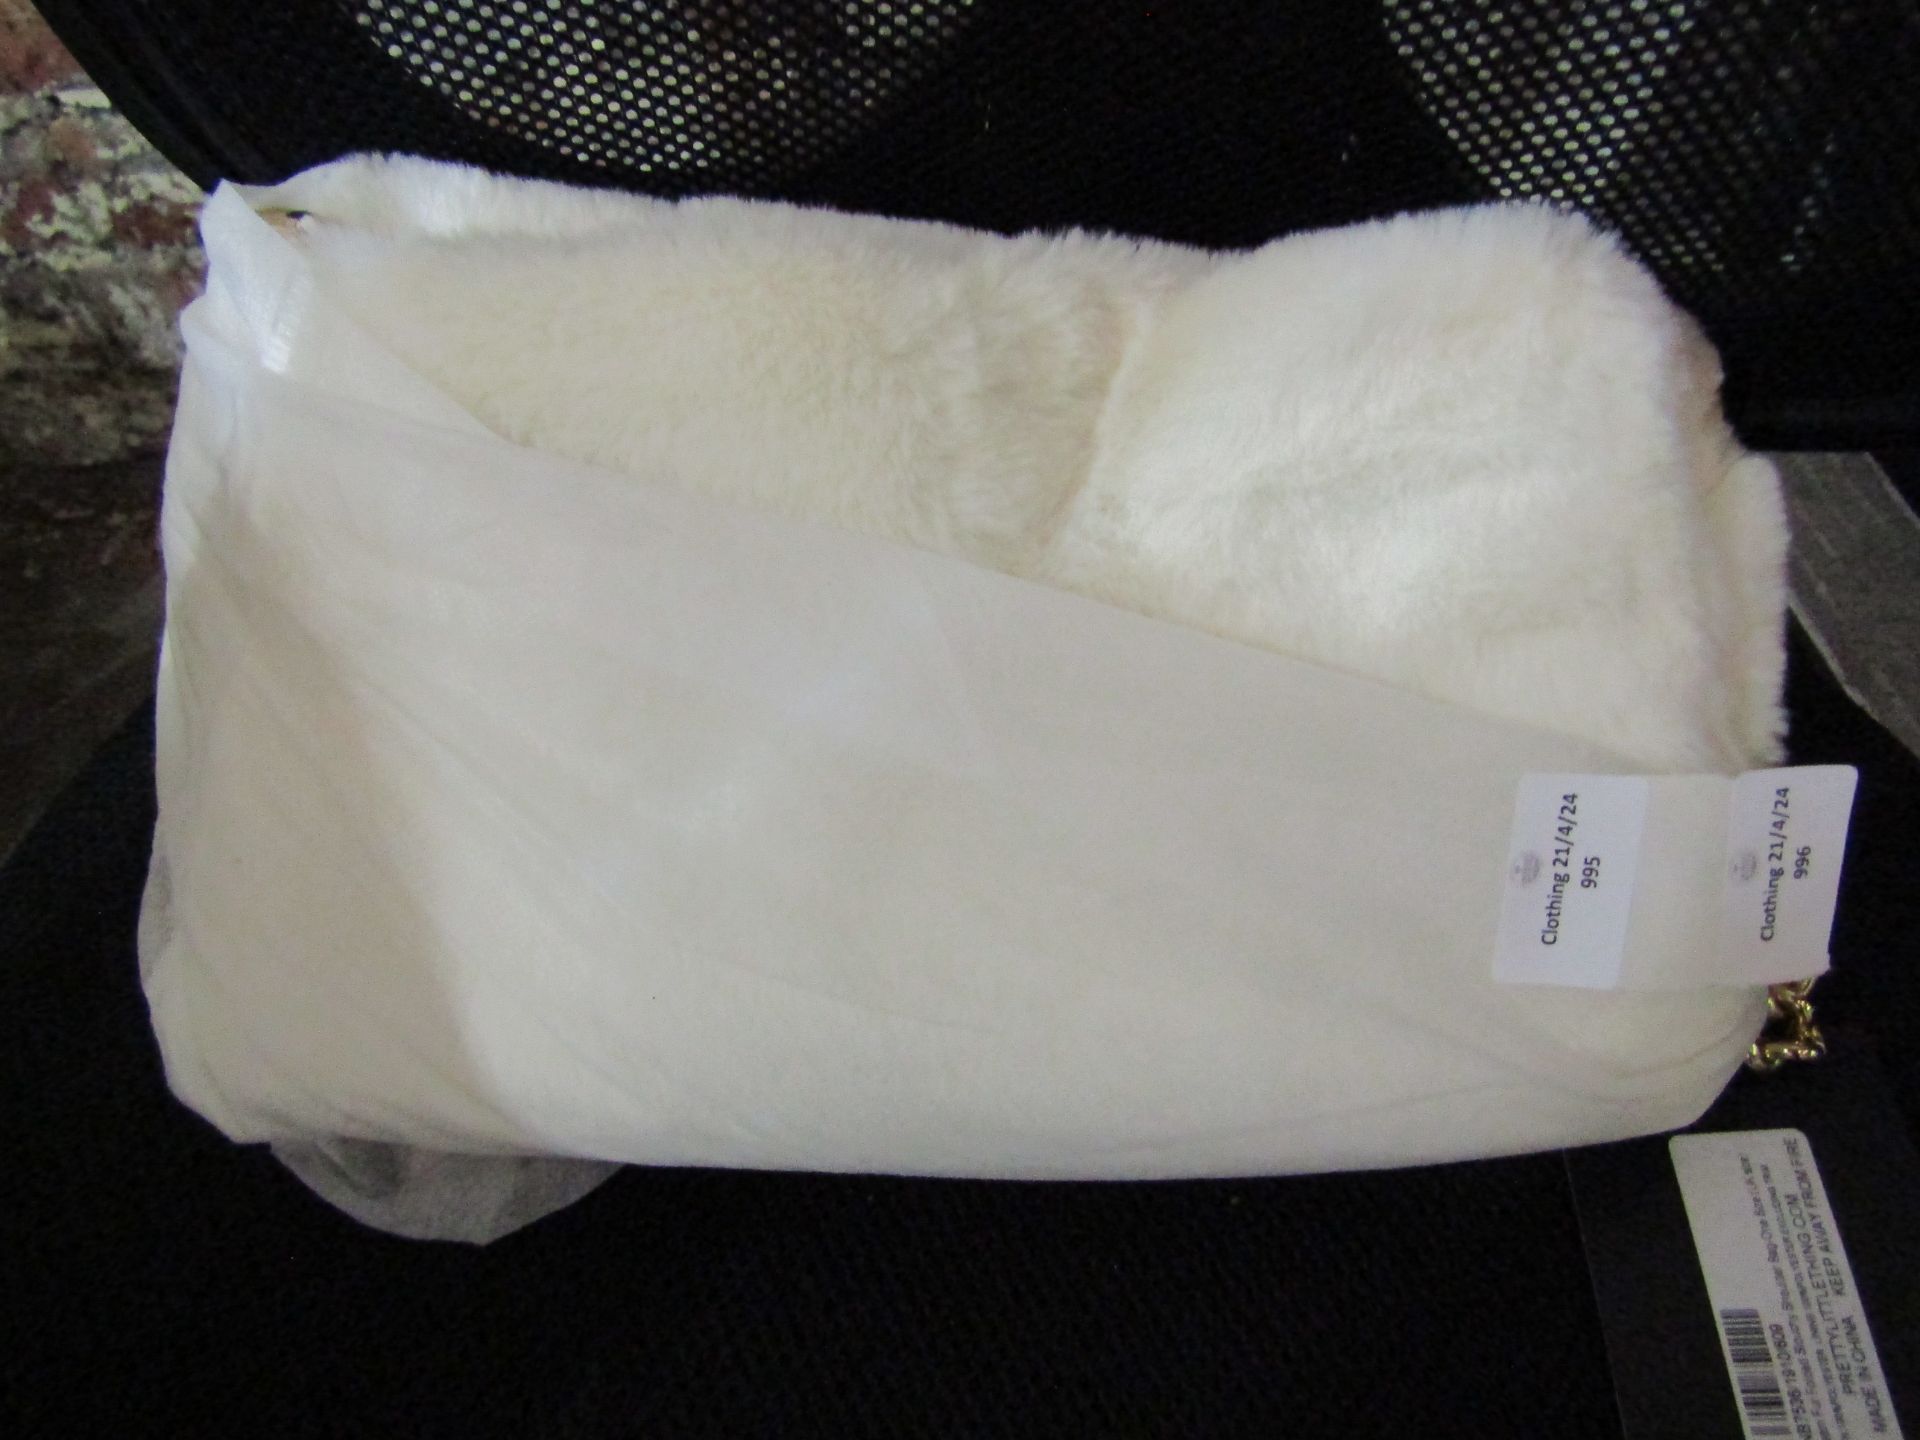 PrettyLittleThing Cream Fur Folded Slouchy Shoulder bag-One Size - Good Condition & Packaged.